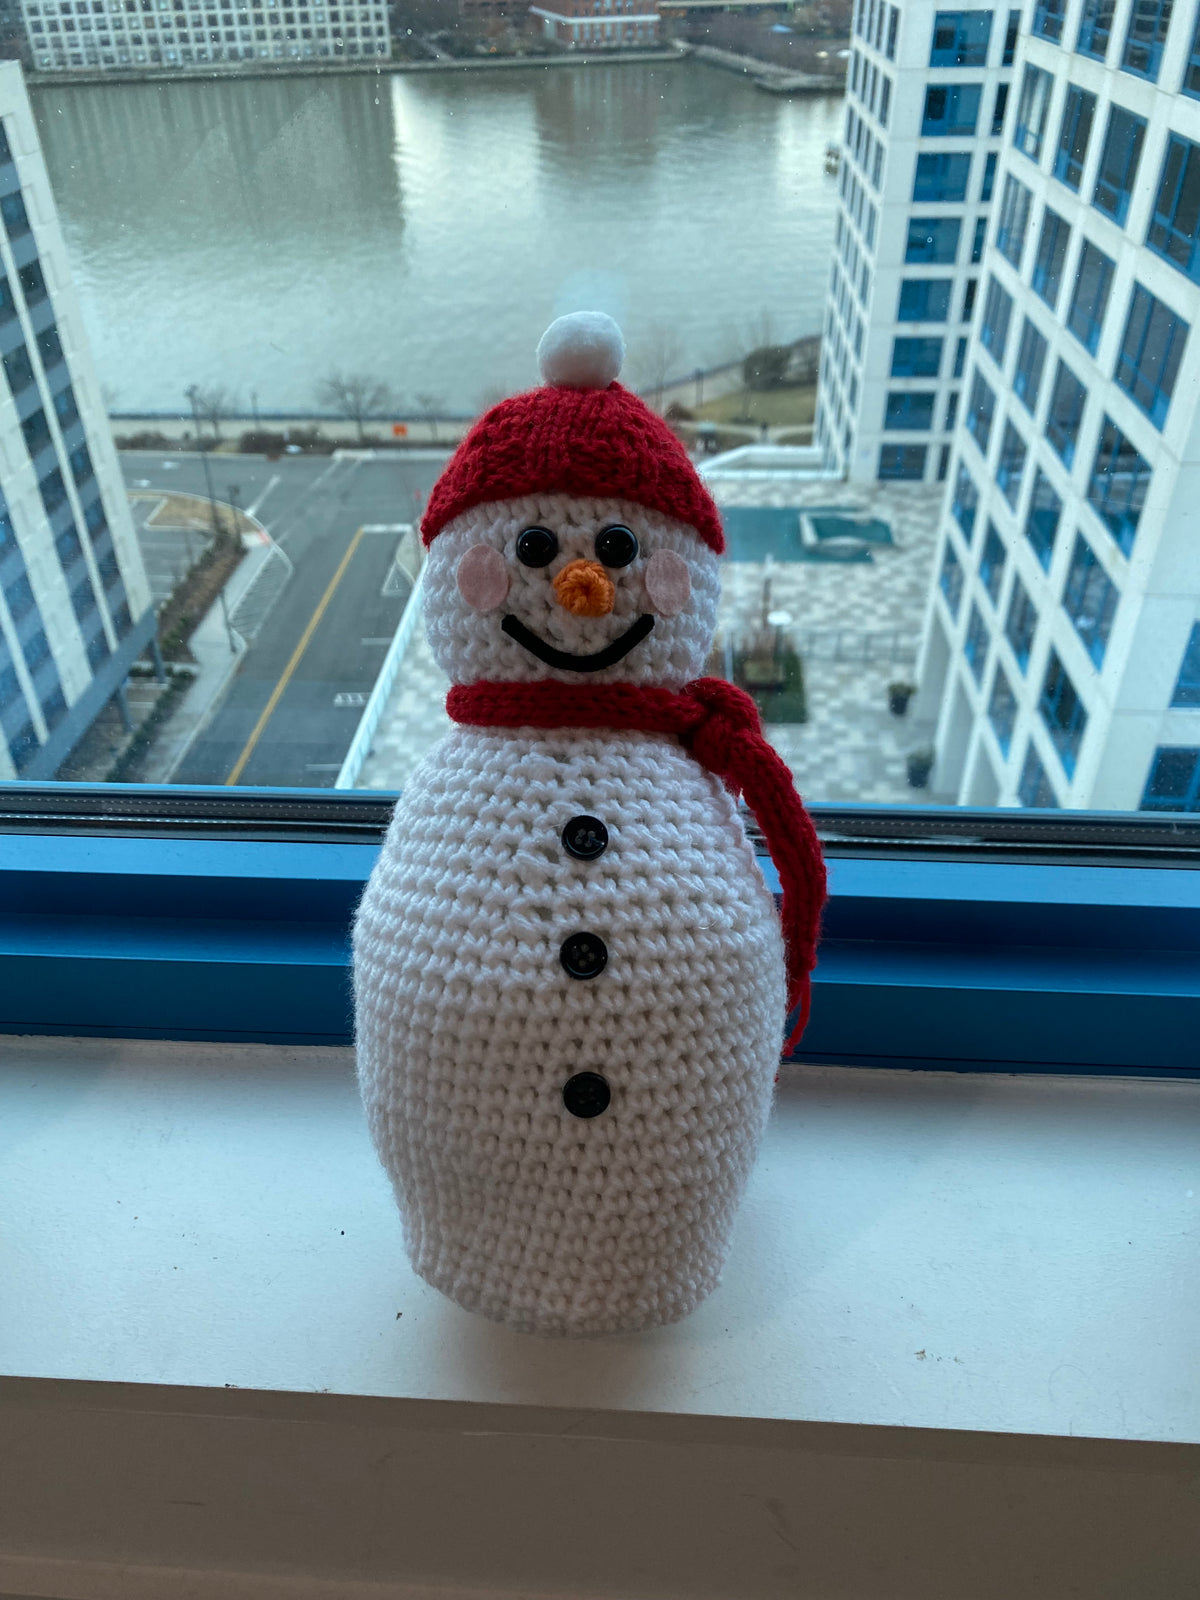 Cute crocheted snowman with a red beanie and red scarf